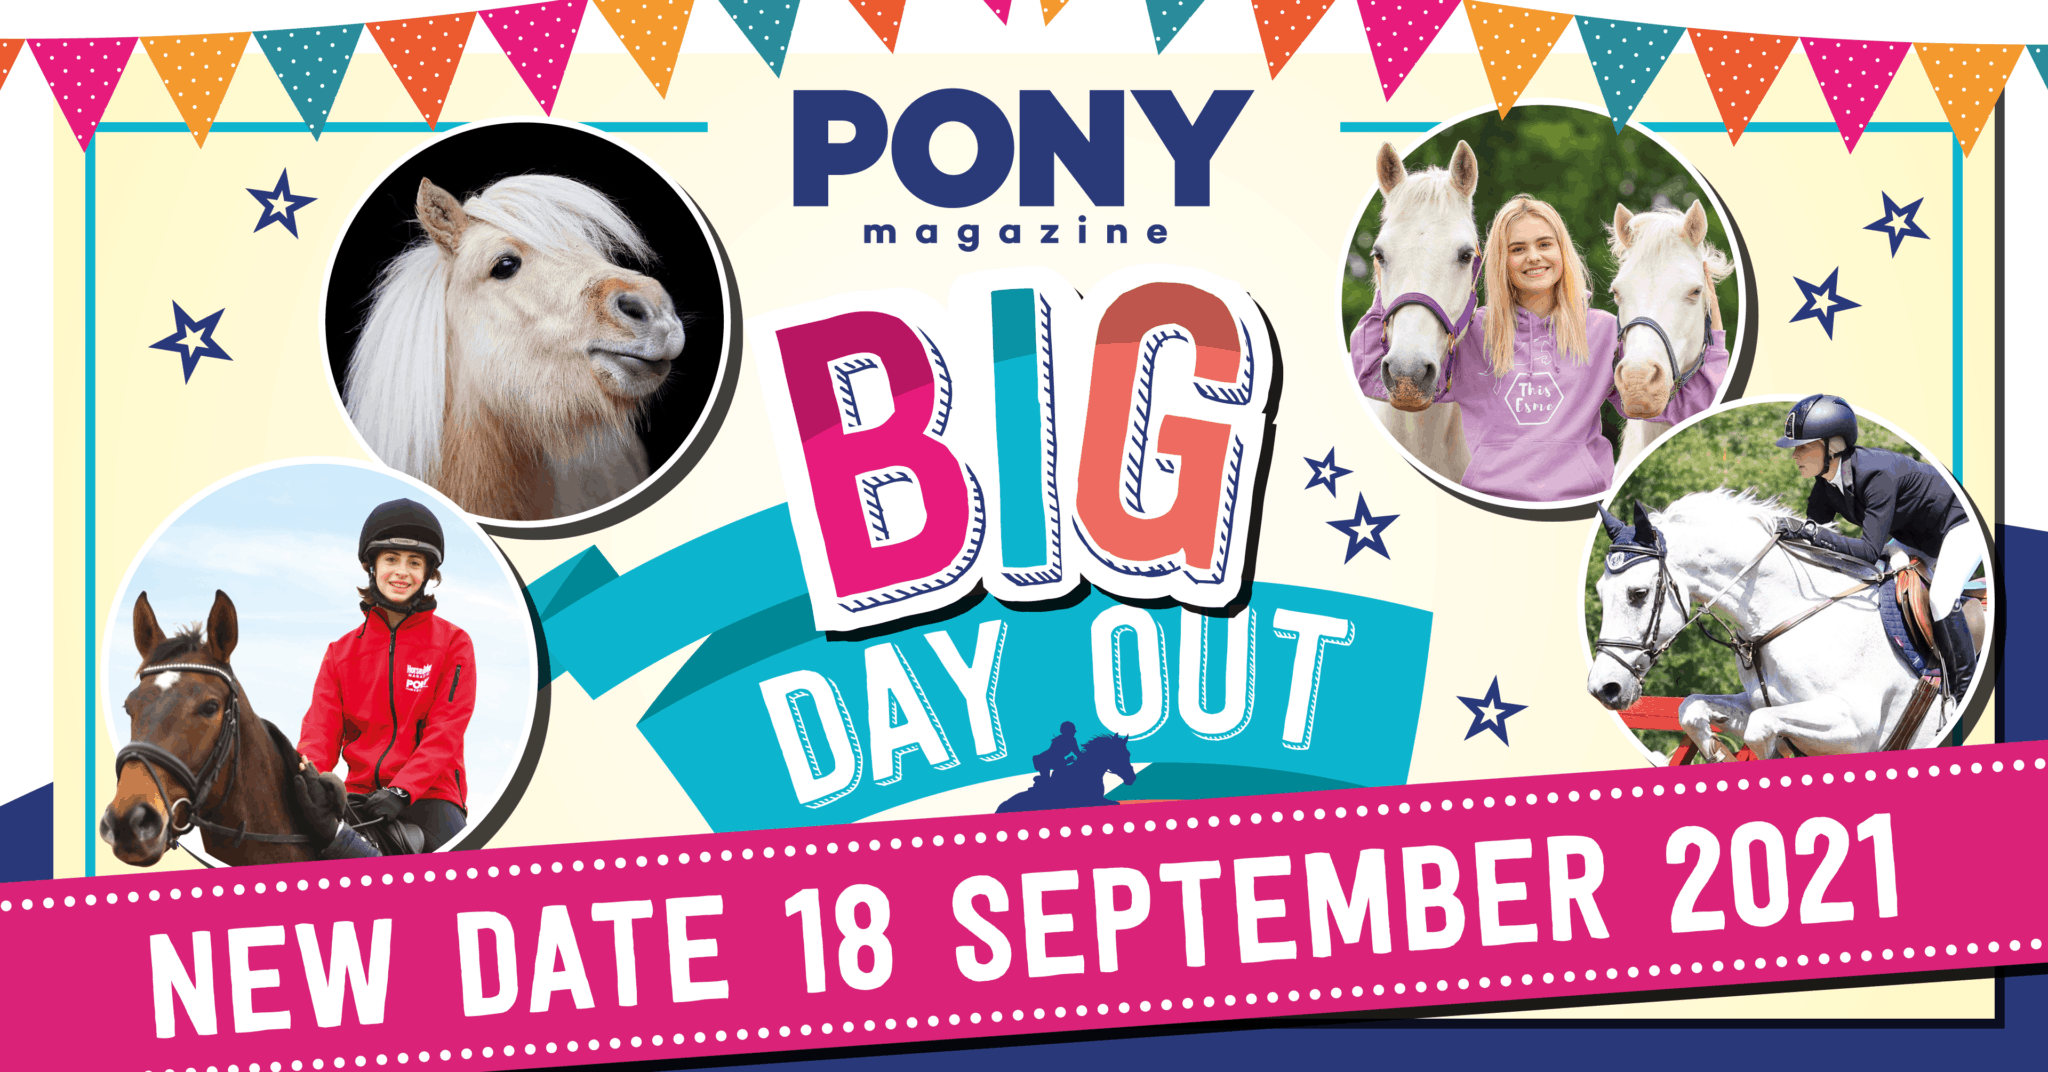 Important update about PONY Mag's Big Day Out Pony Magazine